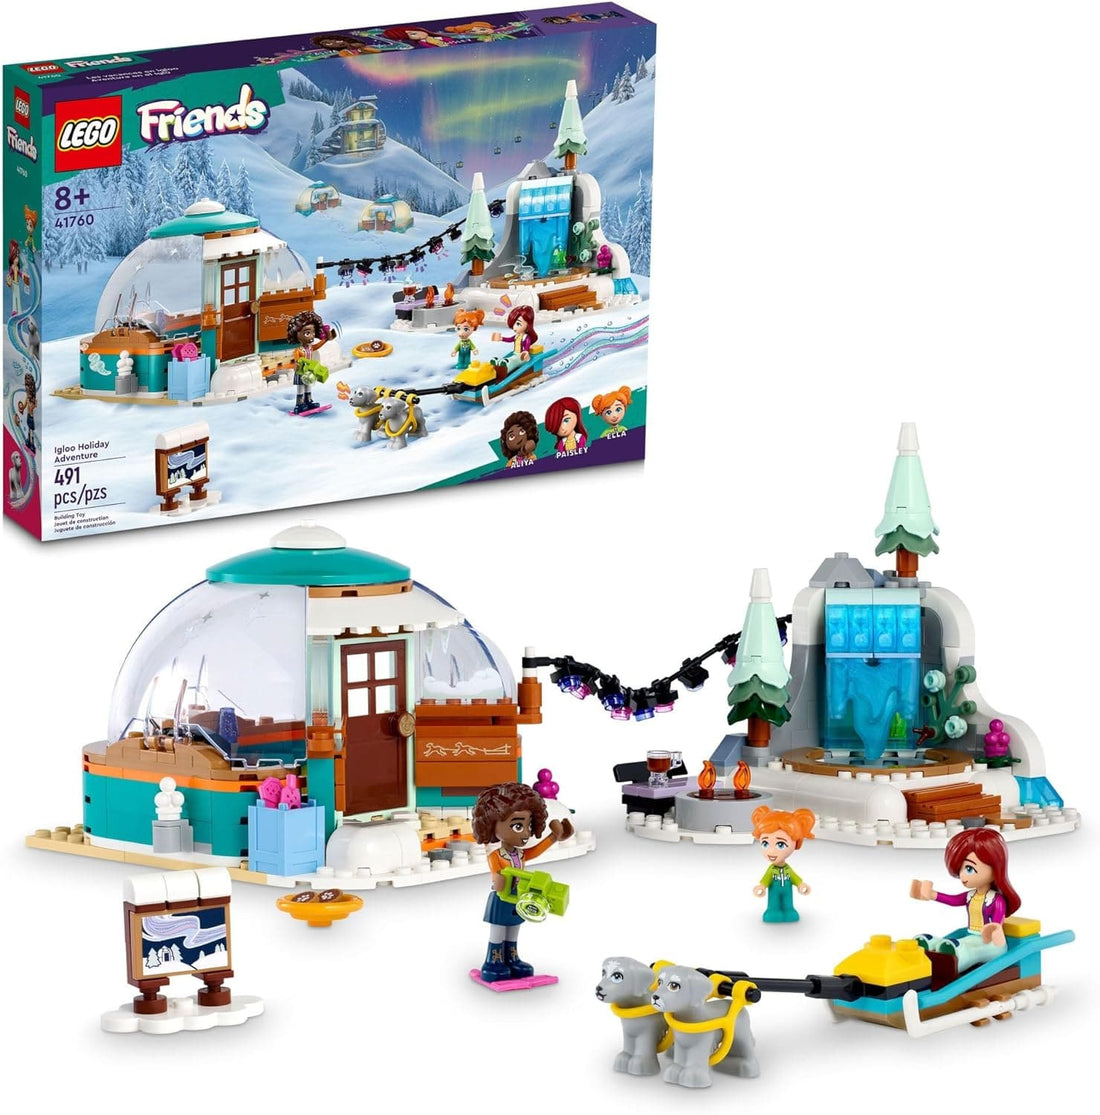 LEGO Friends Igloo Holiday Adventure with 3 Dolls, 2 Dog Characters - best price from Maltashopper.com 41760